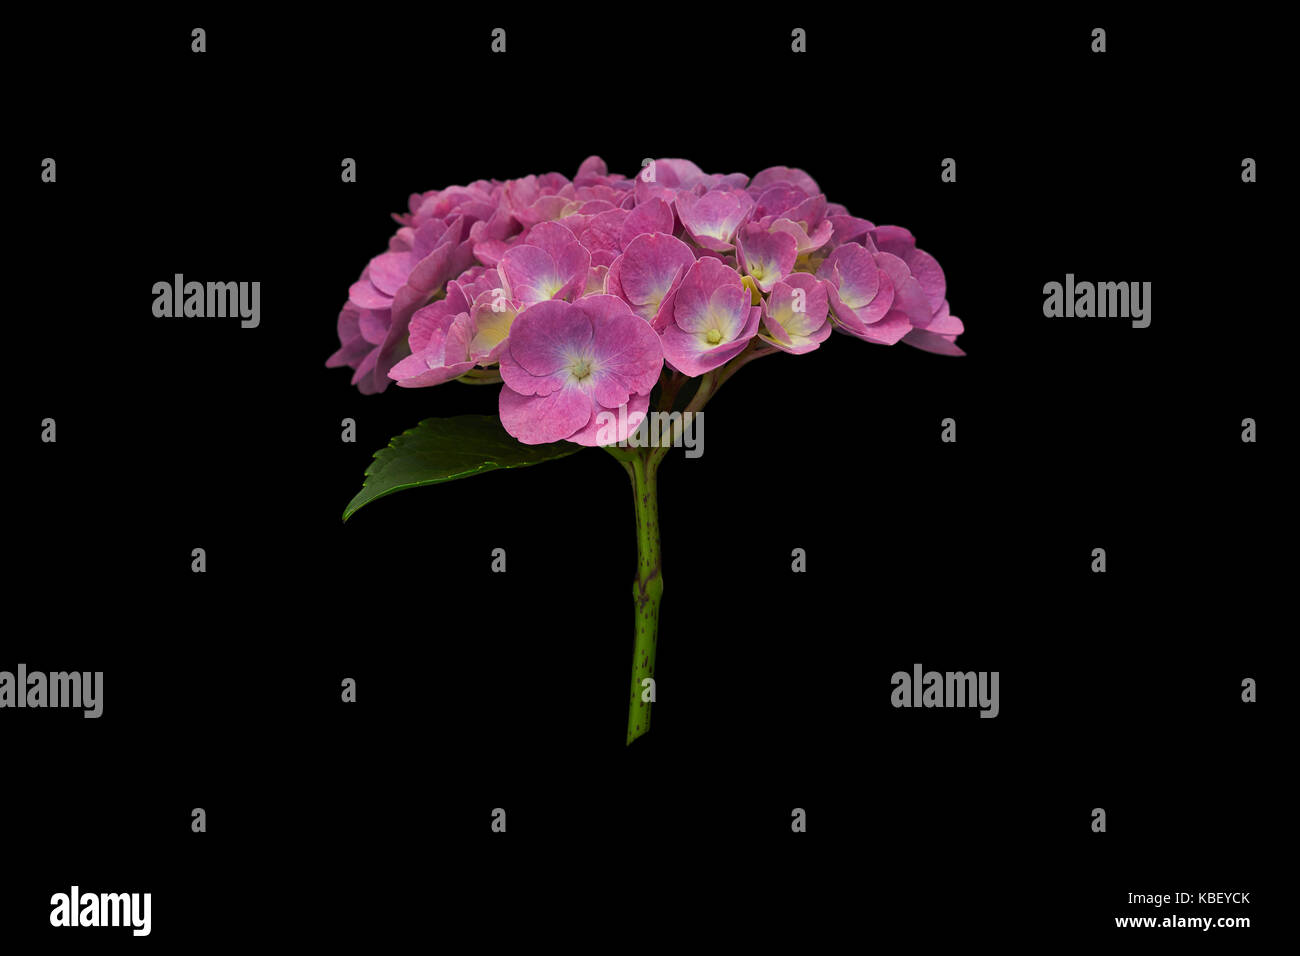 Fragrant hydrangea bouquet with small delicate purple petals, isolated on black background Stock Photo